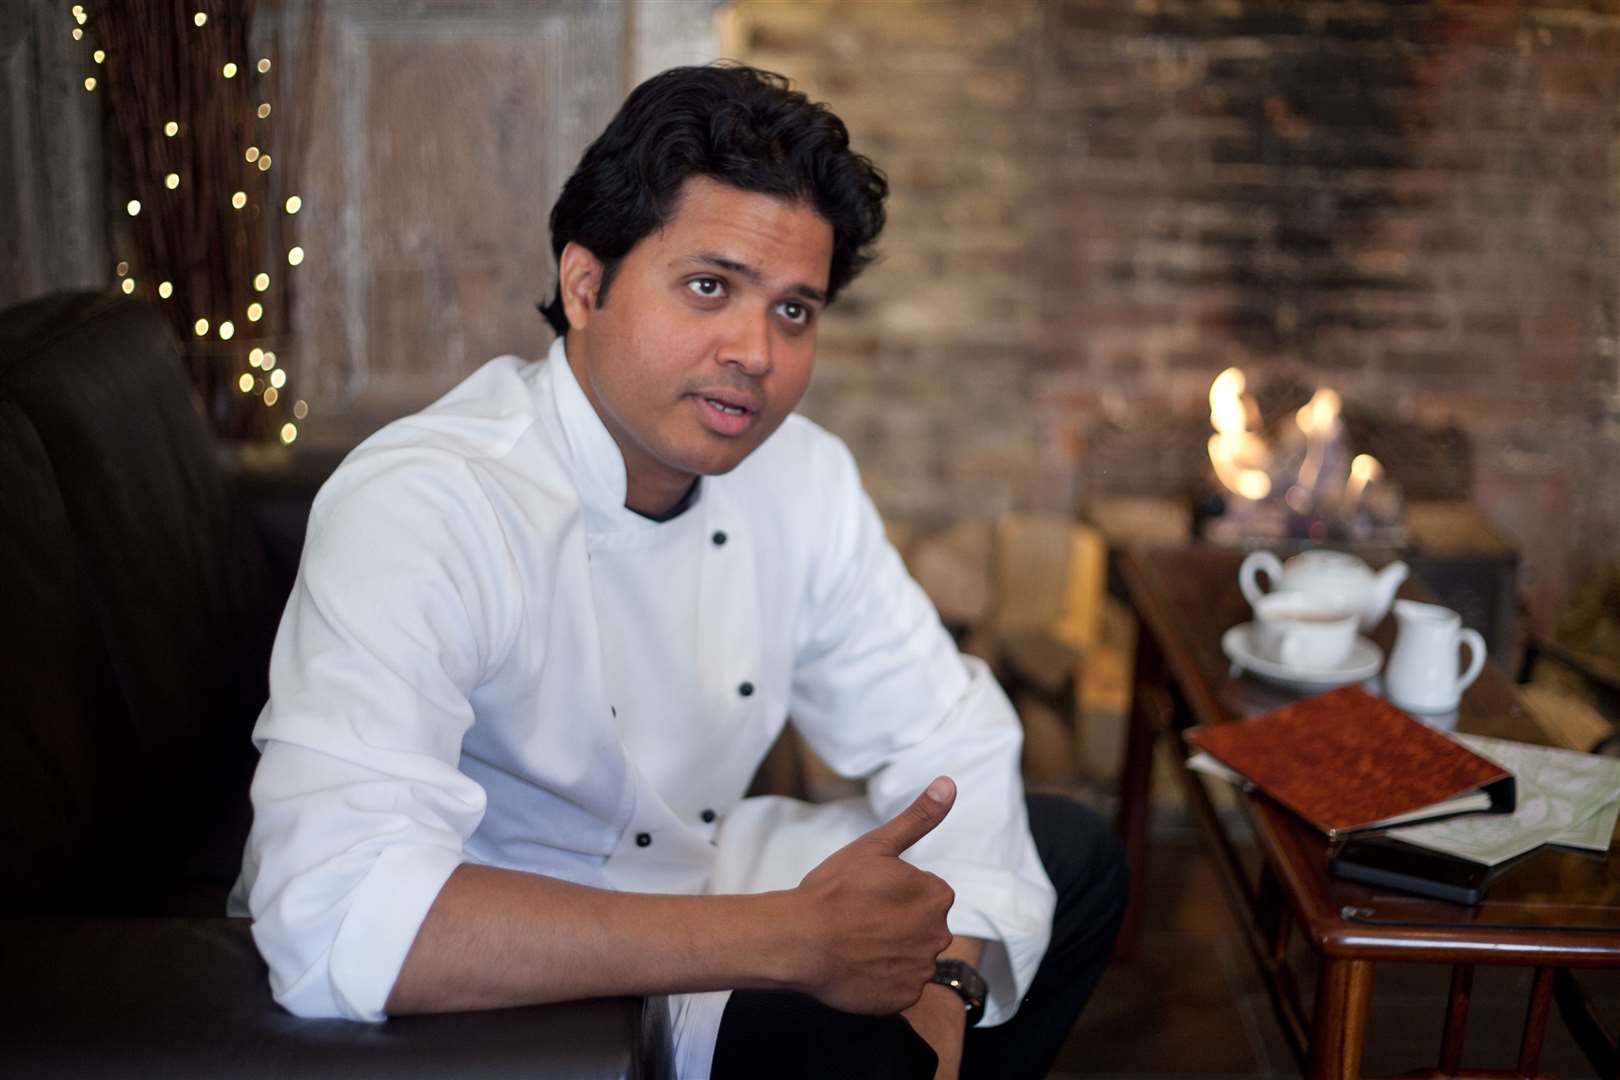 Ambrette owner and head chef Dev Biswal has been named the best Asian chef in the country. Picture: Manu Palomeque (13006227)